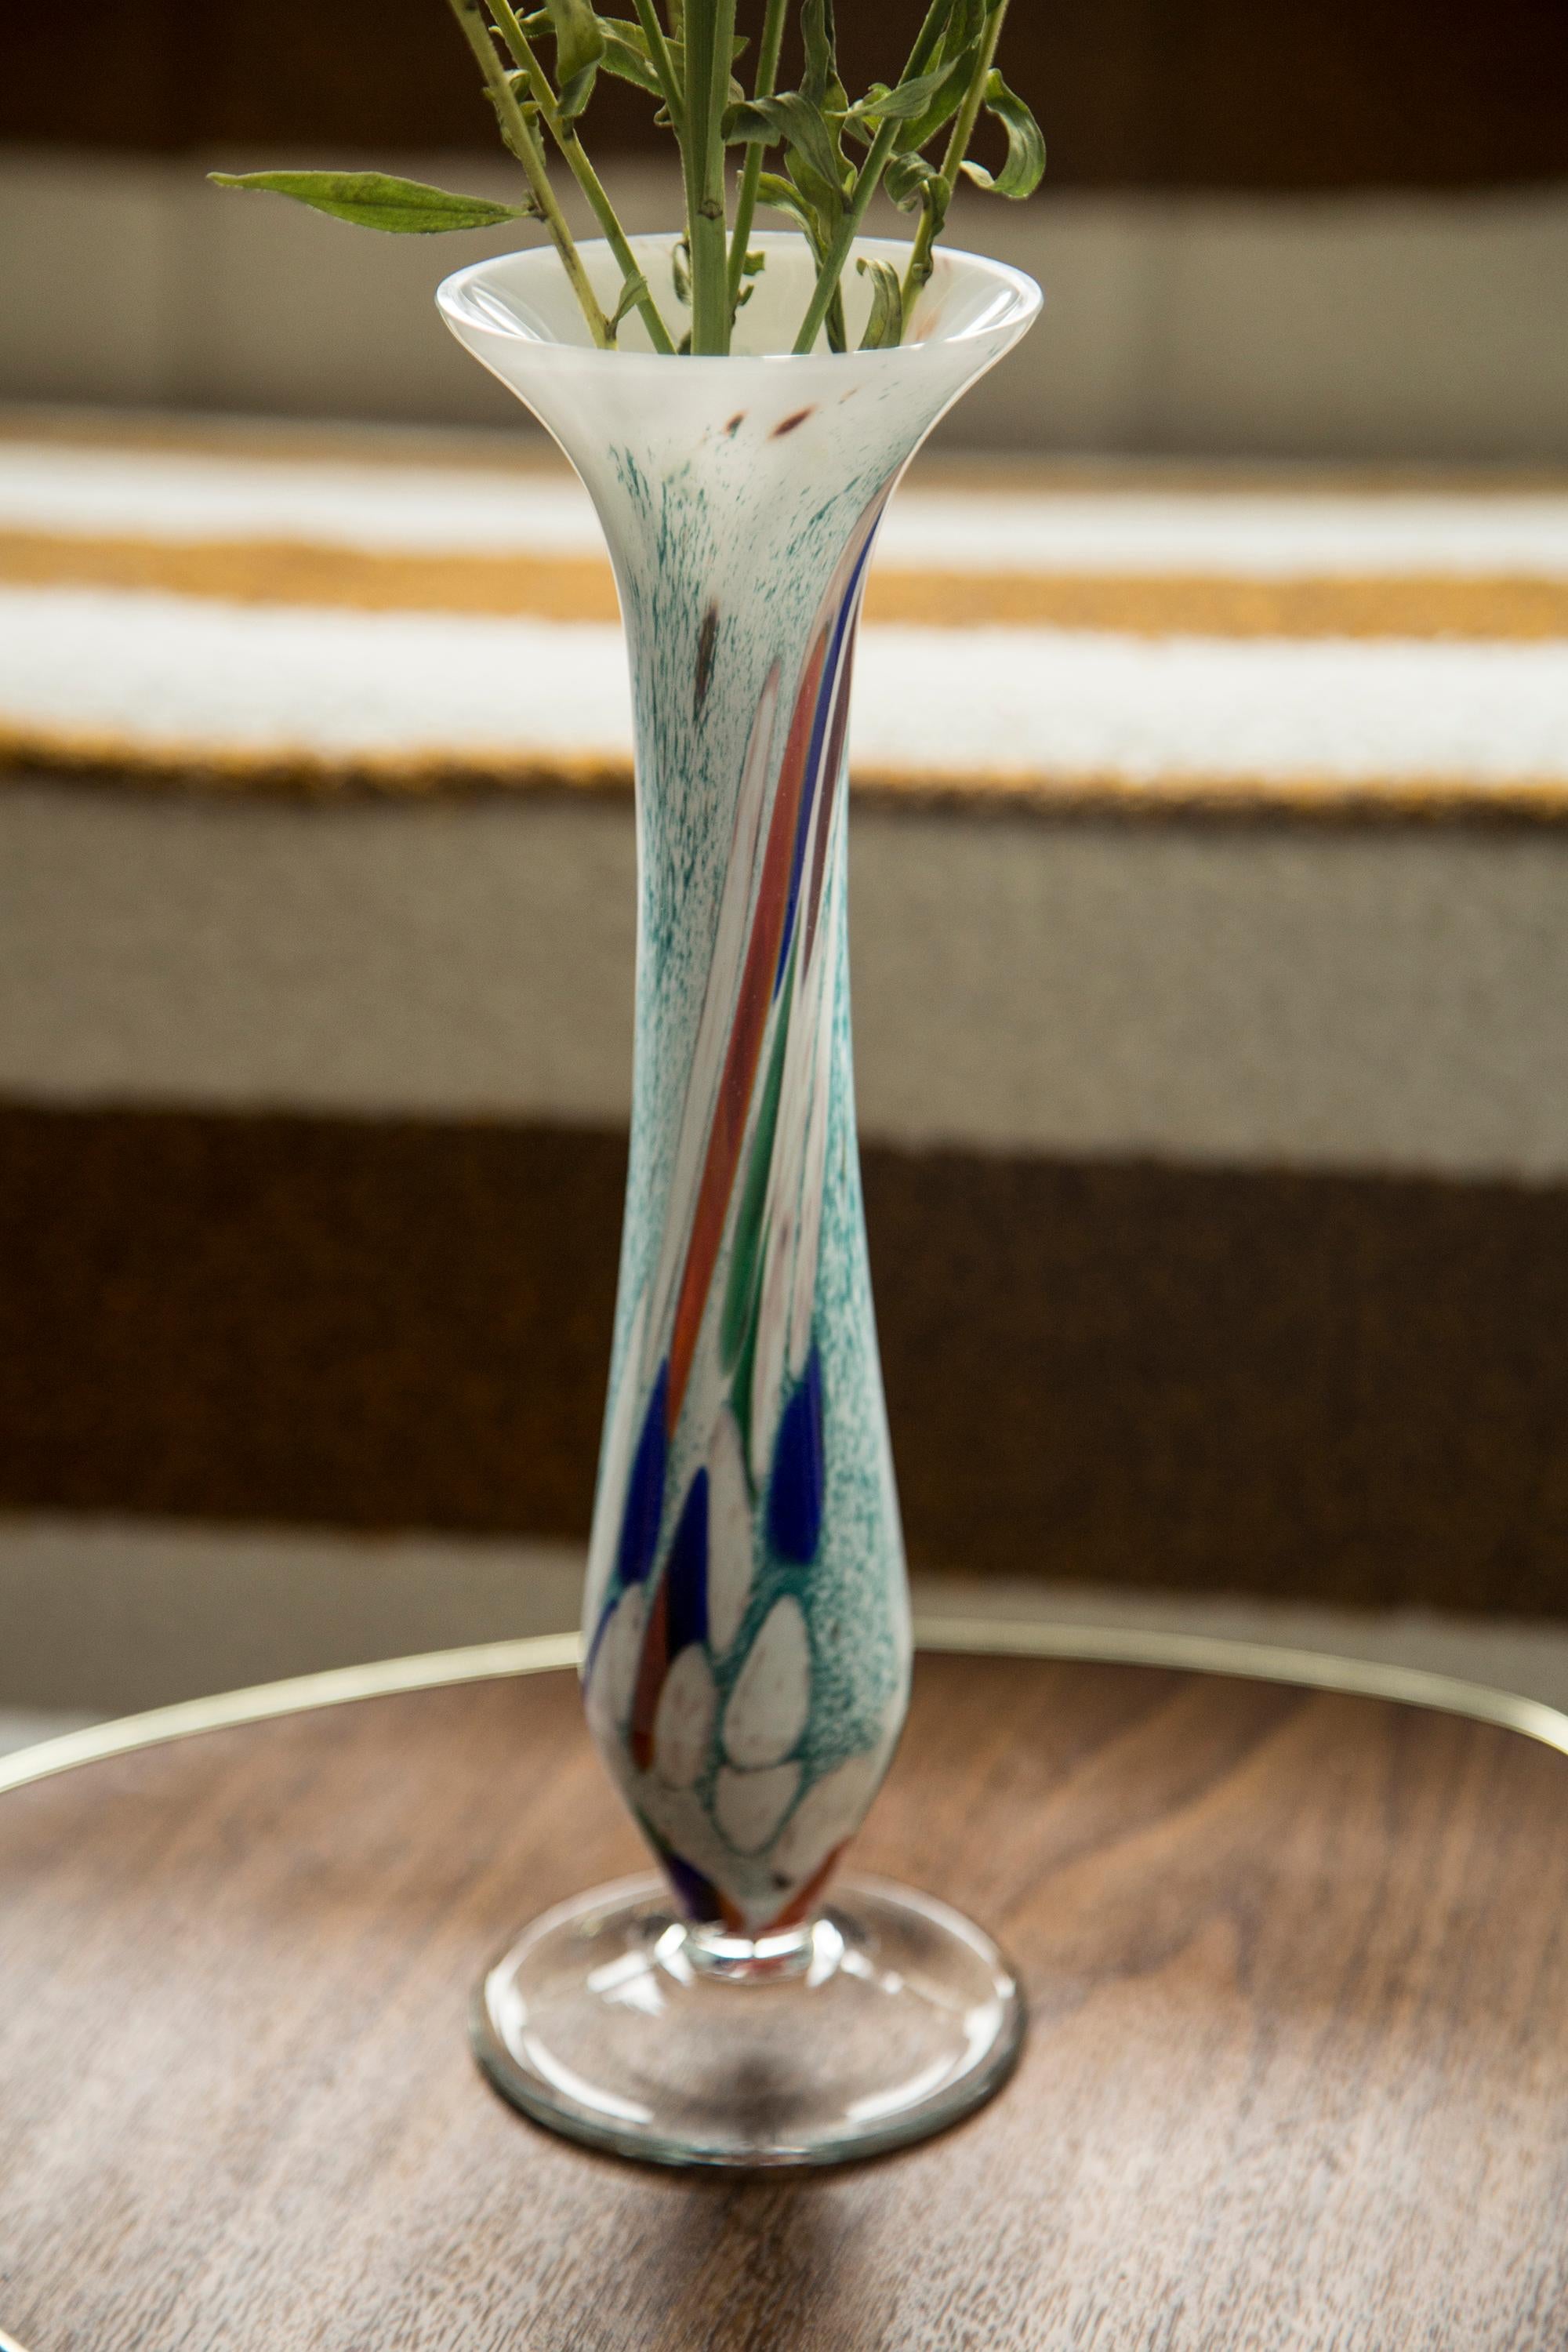 Mid-Century Modern Midcentury Vintage White and Blue Slim Murano Vase, Italy, 1960s For Sale